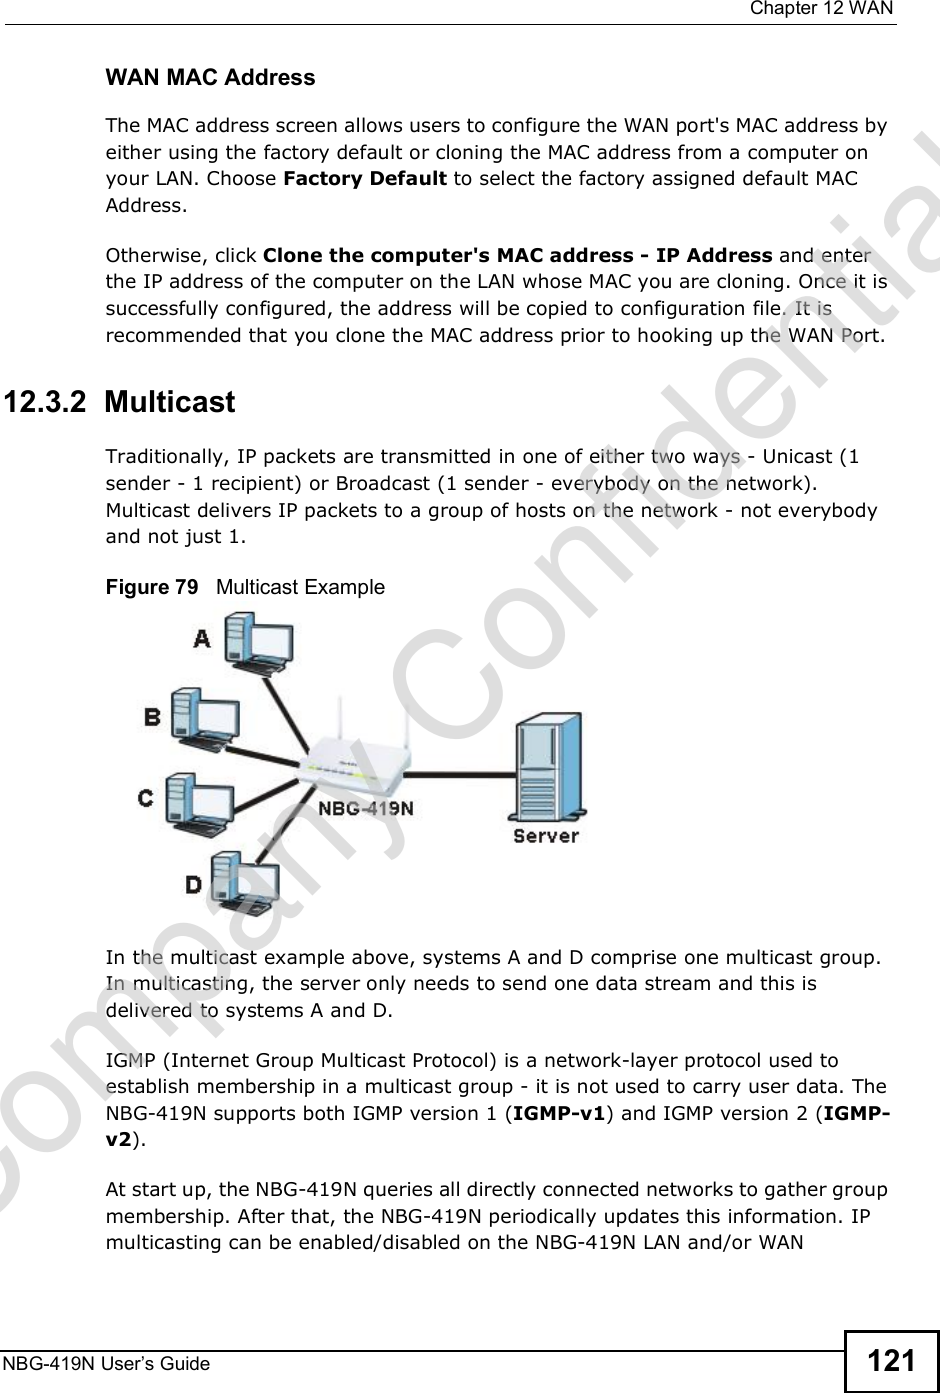  Chapter 12WANNBG-419N User s Guide 121WAN MAC AddressThe MAC address screen allows users to configure the WAN port&apos;s MAC address by either using the factory default or cloning the MAC address from a computer on your LAN. Choose Factory Default to select the factory assigned default MAC Address.Otherwise, click Clone the computer&apos;s MAC address - IP Address and enter the IP address of the computer on the LAN whose MAC you are cloning. Once it is successfully configured, the address will be copied to configuration file. It is recommended that you clone the MAC address prior to hooking up the WAN Port.12.3.2  MulticastTraditionally, IP packets are transmitted in one of either two ways - Unicast (1 sender - 1 recipient) or Broadcast (1 sender - everybody on the network). Multicast delivers IP packets to a group of hosts on the network - not everybody and not just 1. Figure 79   Multicast ExampleIn the multicast example above, systems A and D comprise one multicast group. In multicasting, the server only needs to send one data stream and this is delivered to systems A and D. IGMP (Internet Group Multicast Protocol) is a network-layer protocol used to establish membership in a multicast group - it is not used to carry user data. The NBG-419N supports both IGMP version 1 (IGMP-v1) and IGMP version 2 (IGMP-v2). At start up, the NBG-419N queries all directly connected networks to gather group membership. After that, the NBG-419N periodically updates this information. IP multicasting can be enabled/disabled on the NBG-419N LAN and/or WAN Company Confidential